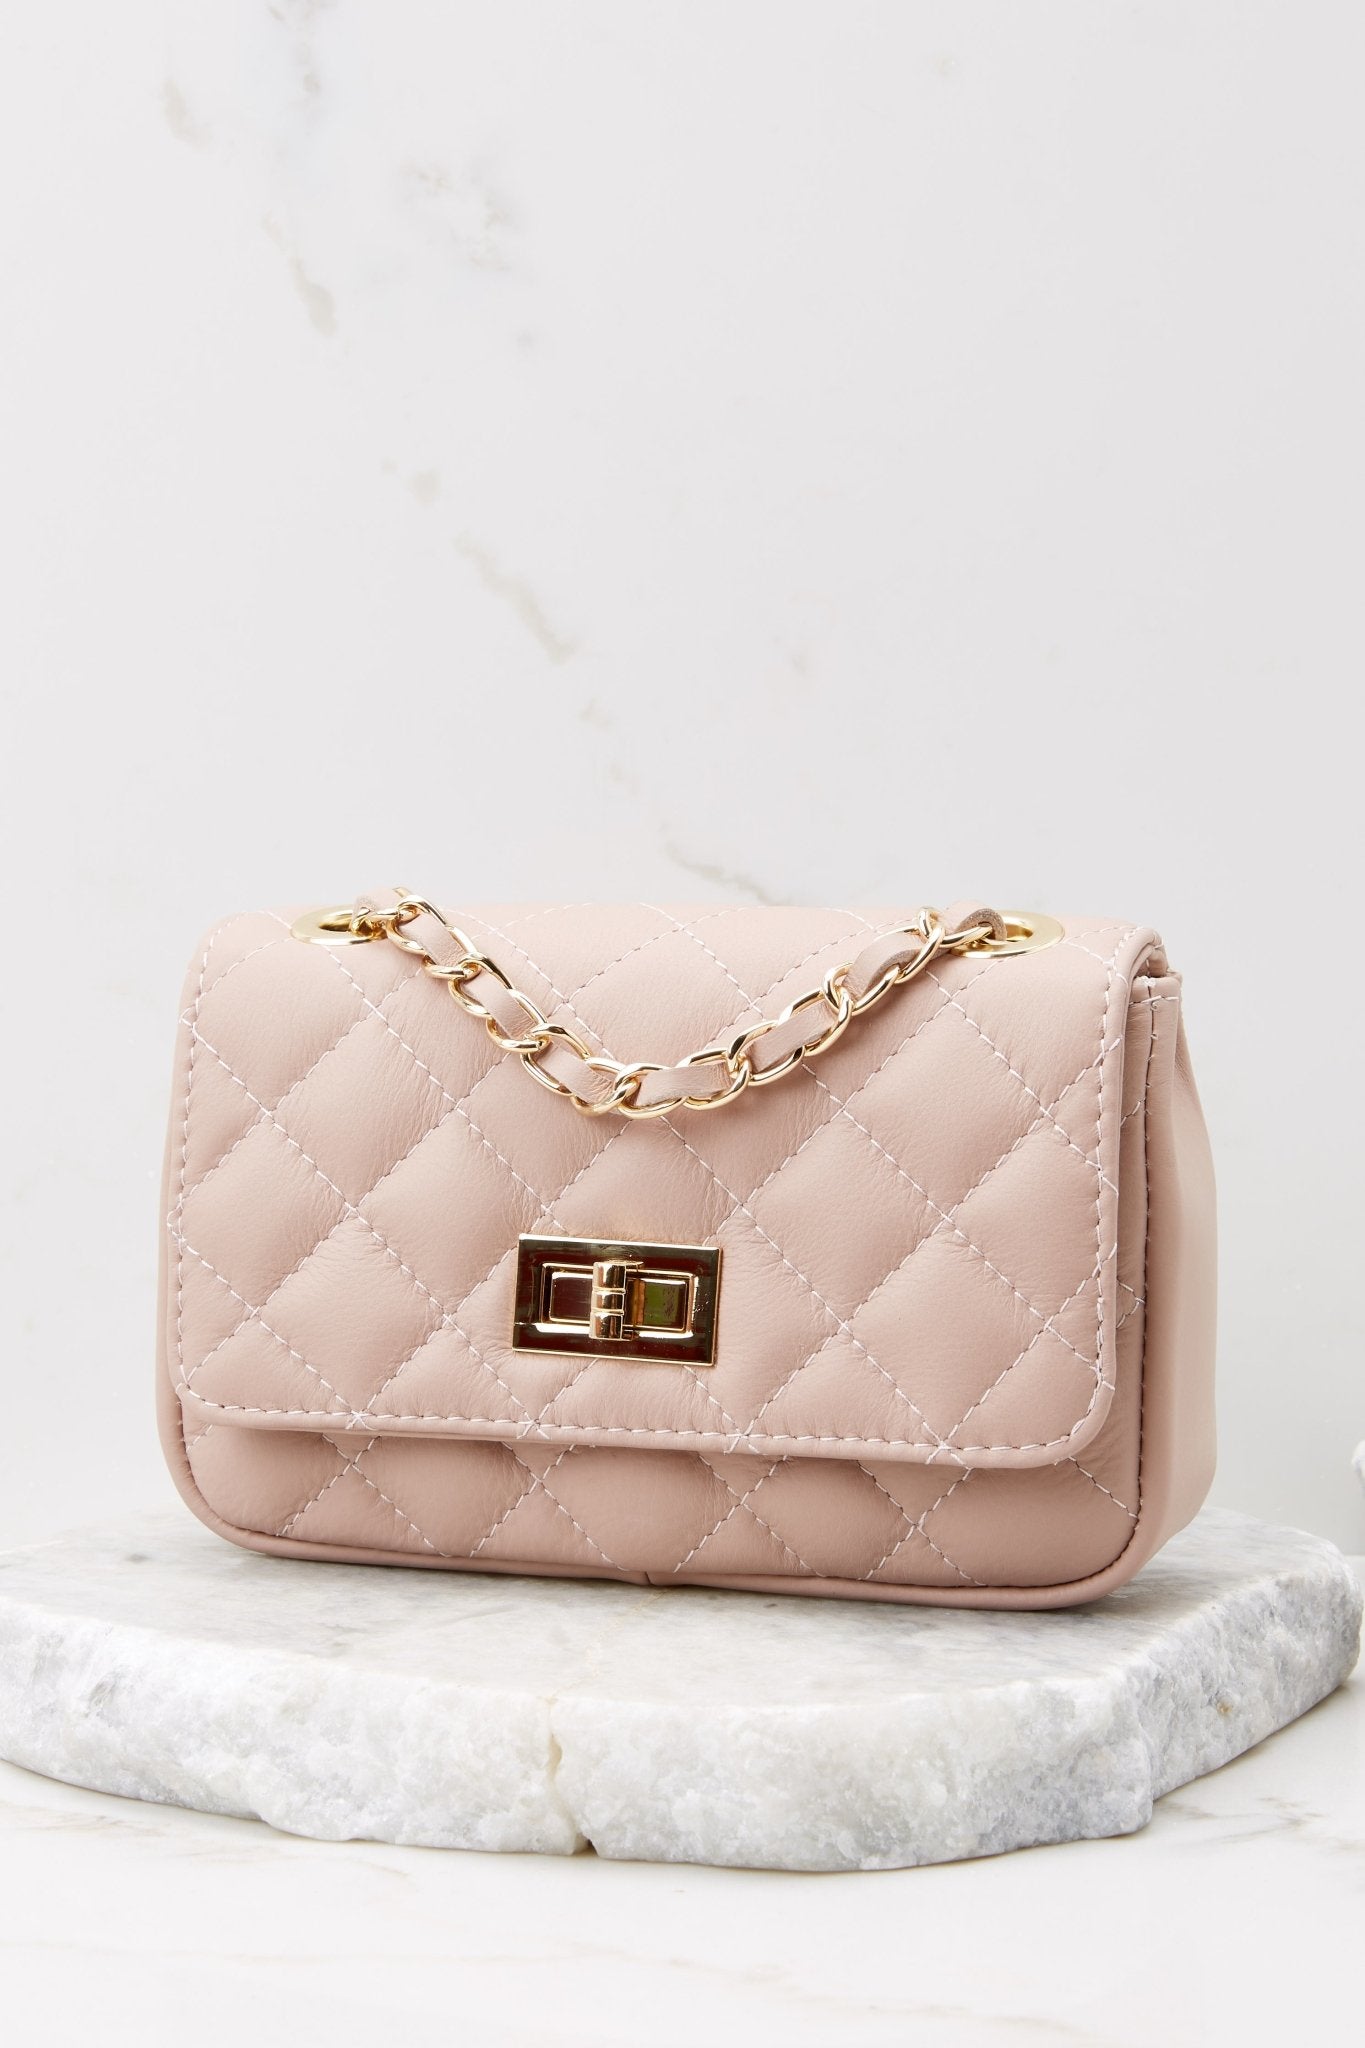 German Fuentes Easy Street Leather Bag in Blush